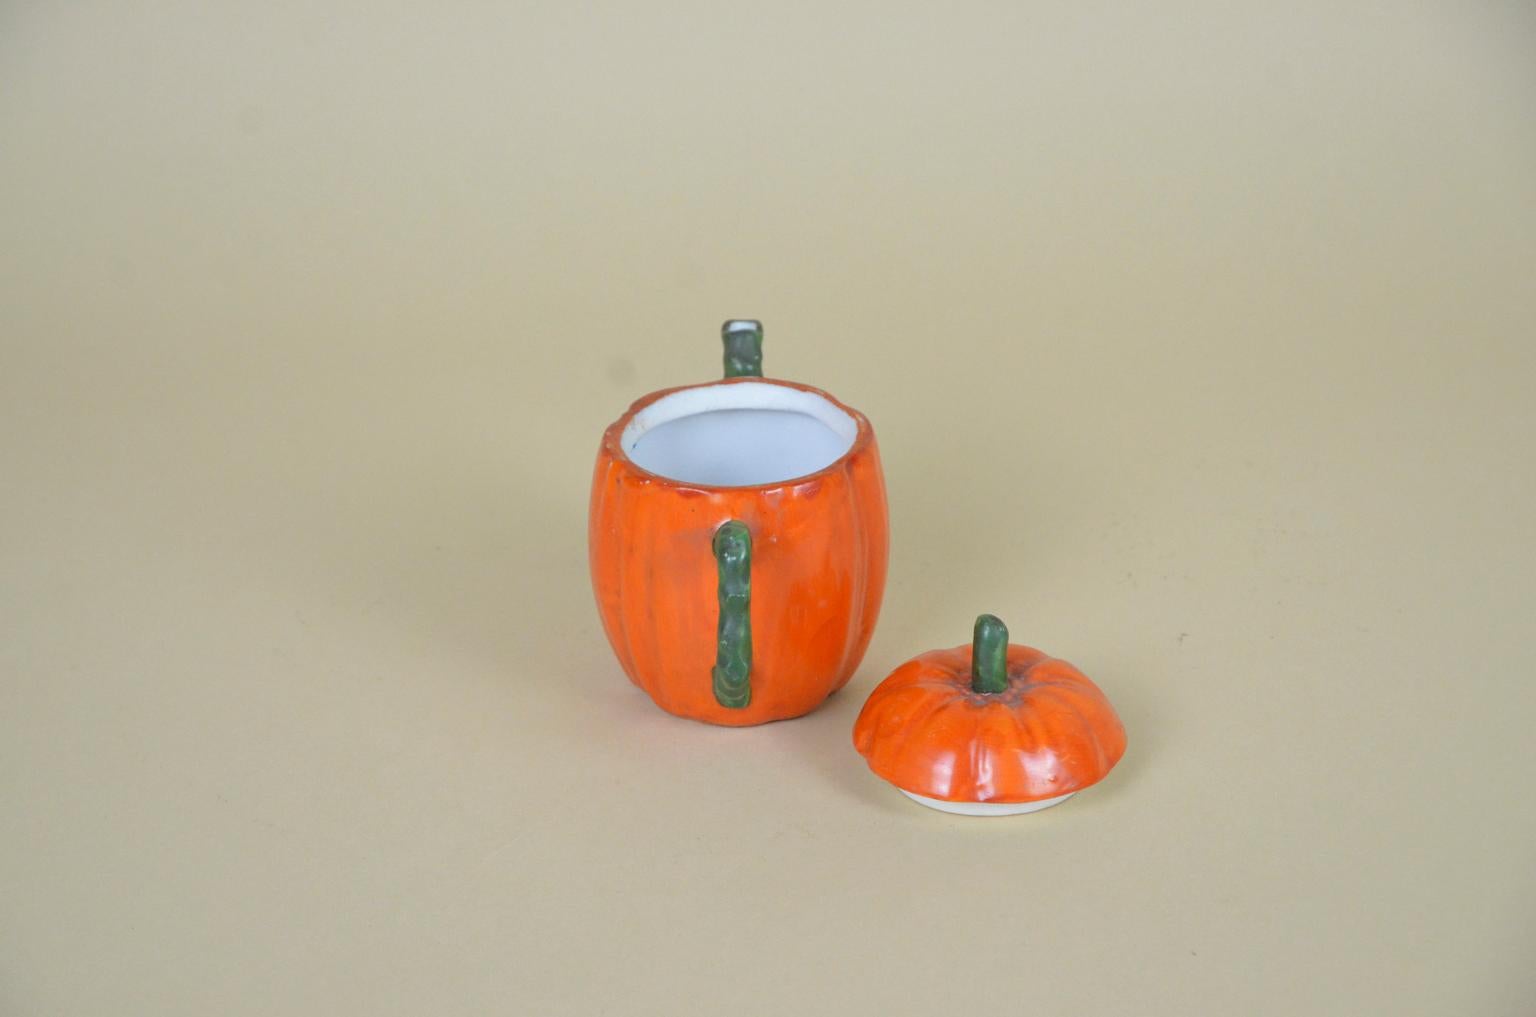 Early 20th Century 1900s Edwardian Porcelain Pumpkin Shaped Teapot Made in England For Sale